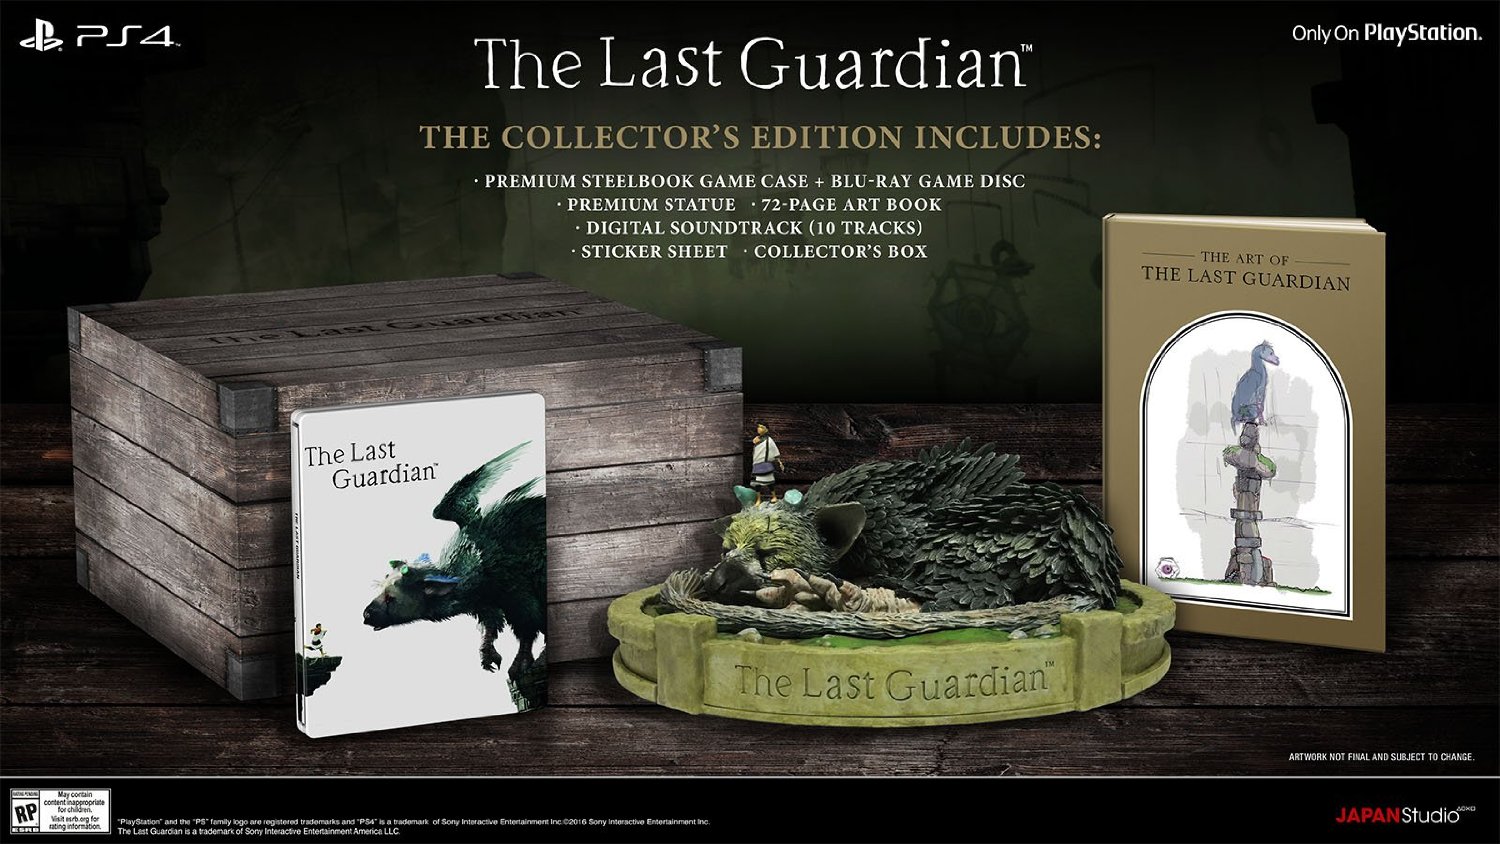 The Last Guardian Collector's Edition (PS4), SIE Japan Studio, genDESIGN